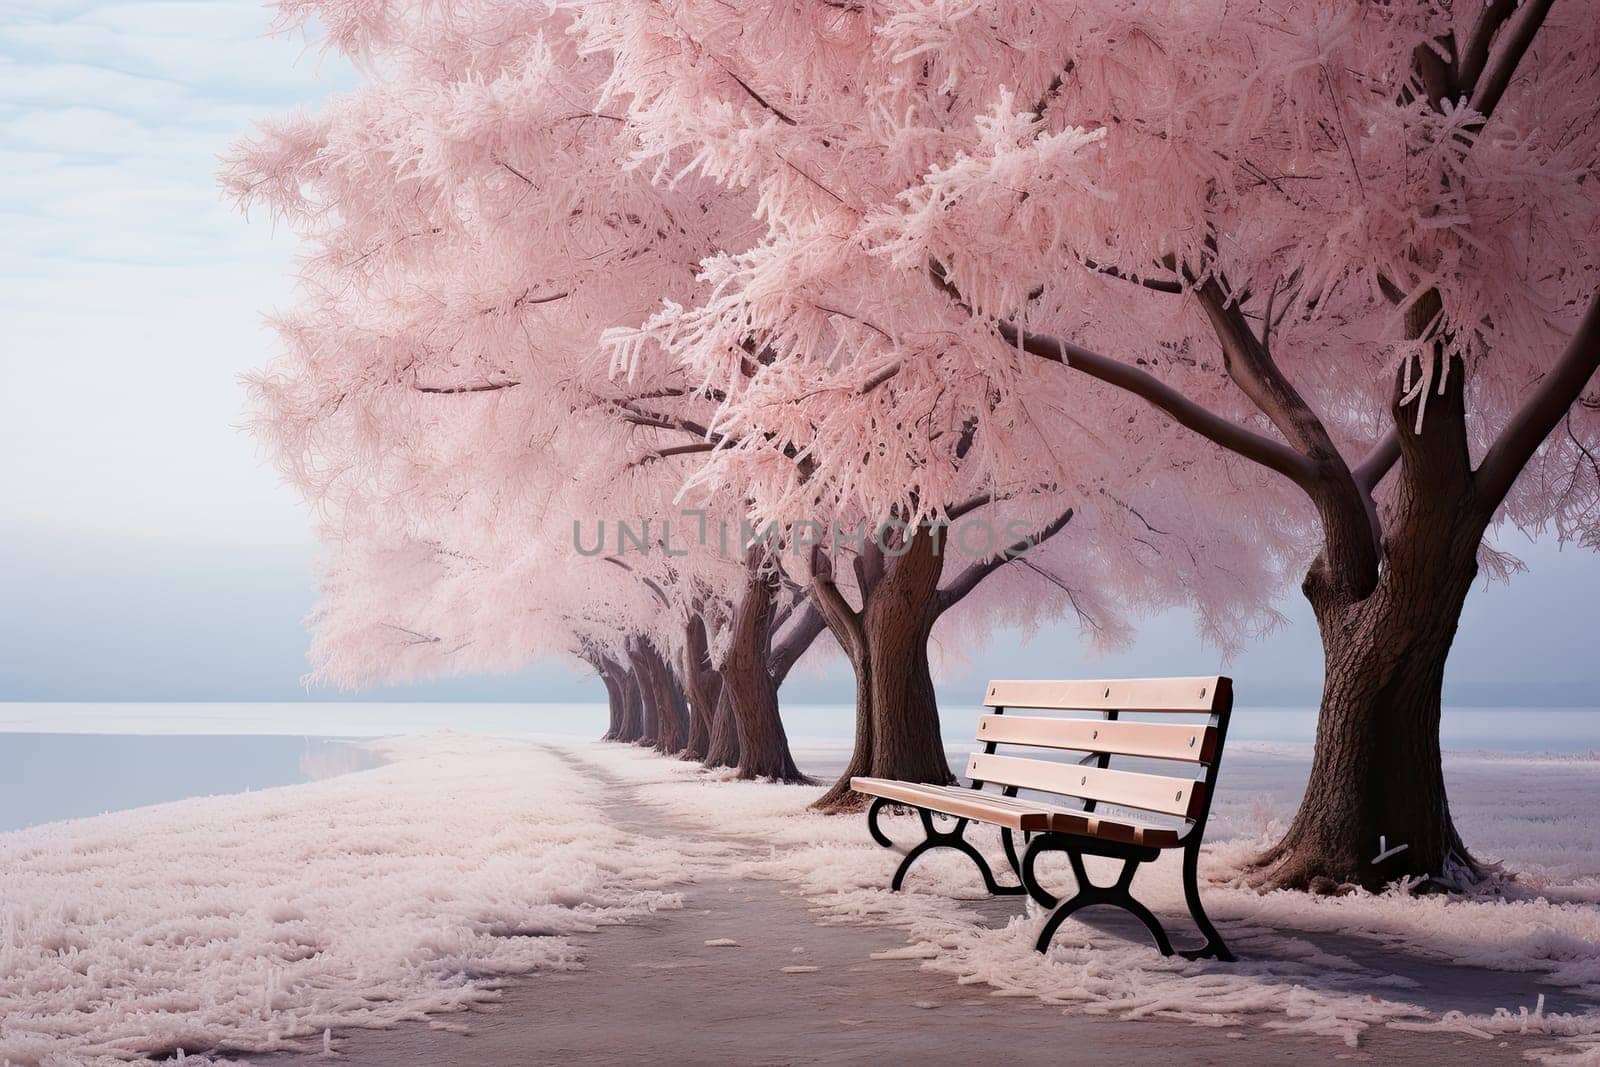 A Serene Winter Scene: A Snow-Covered Park Bench Inviting Tranquility and Solitude